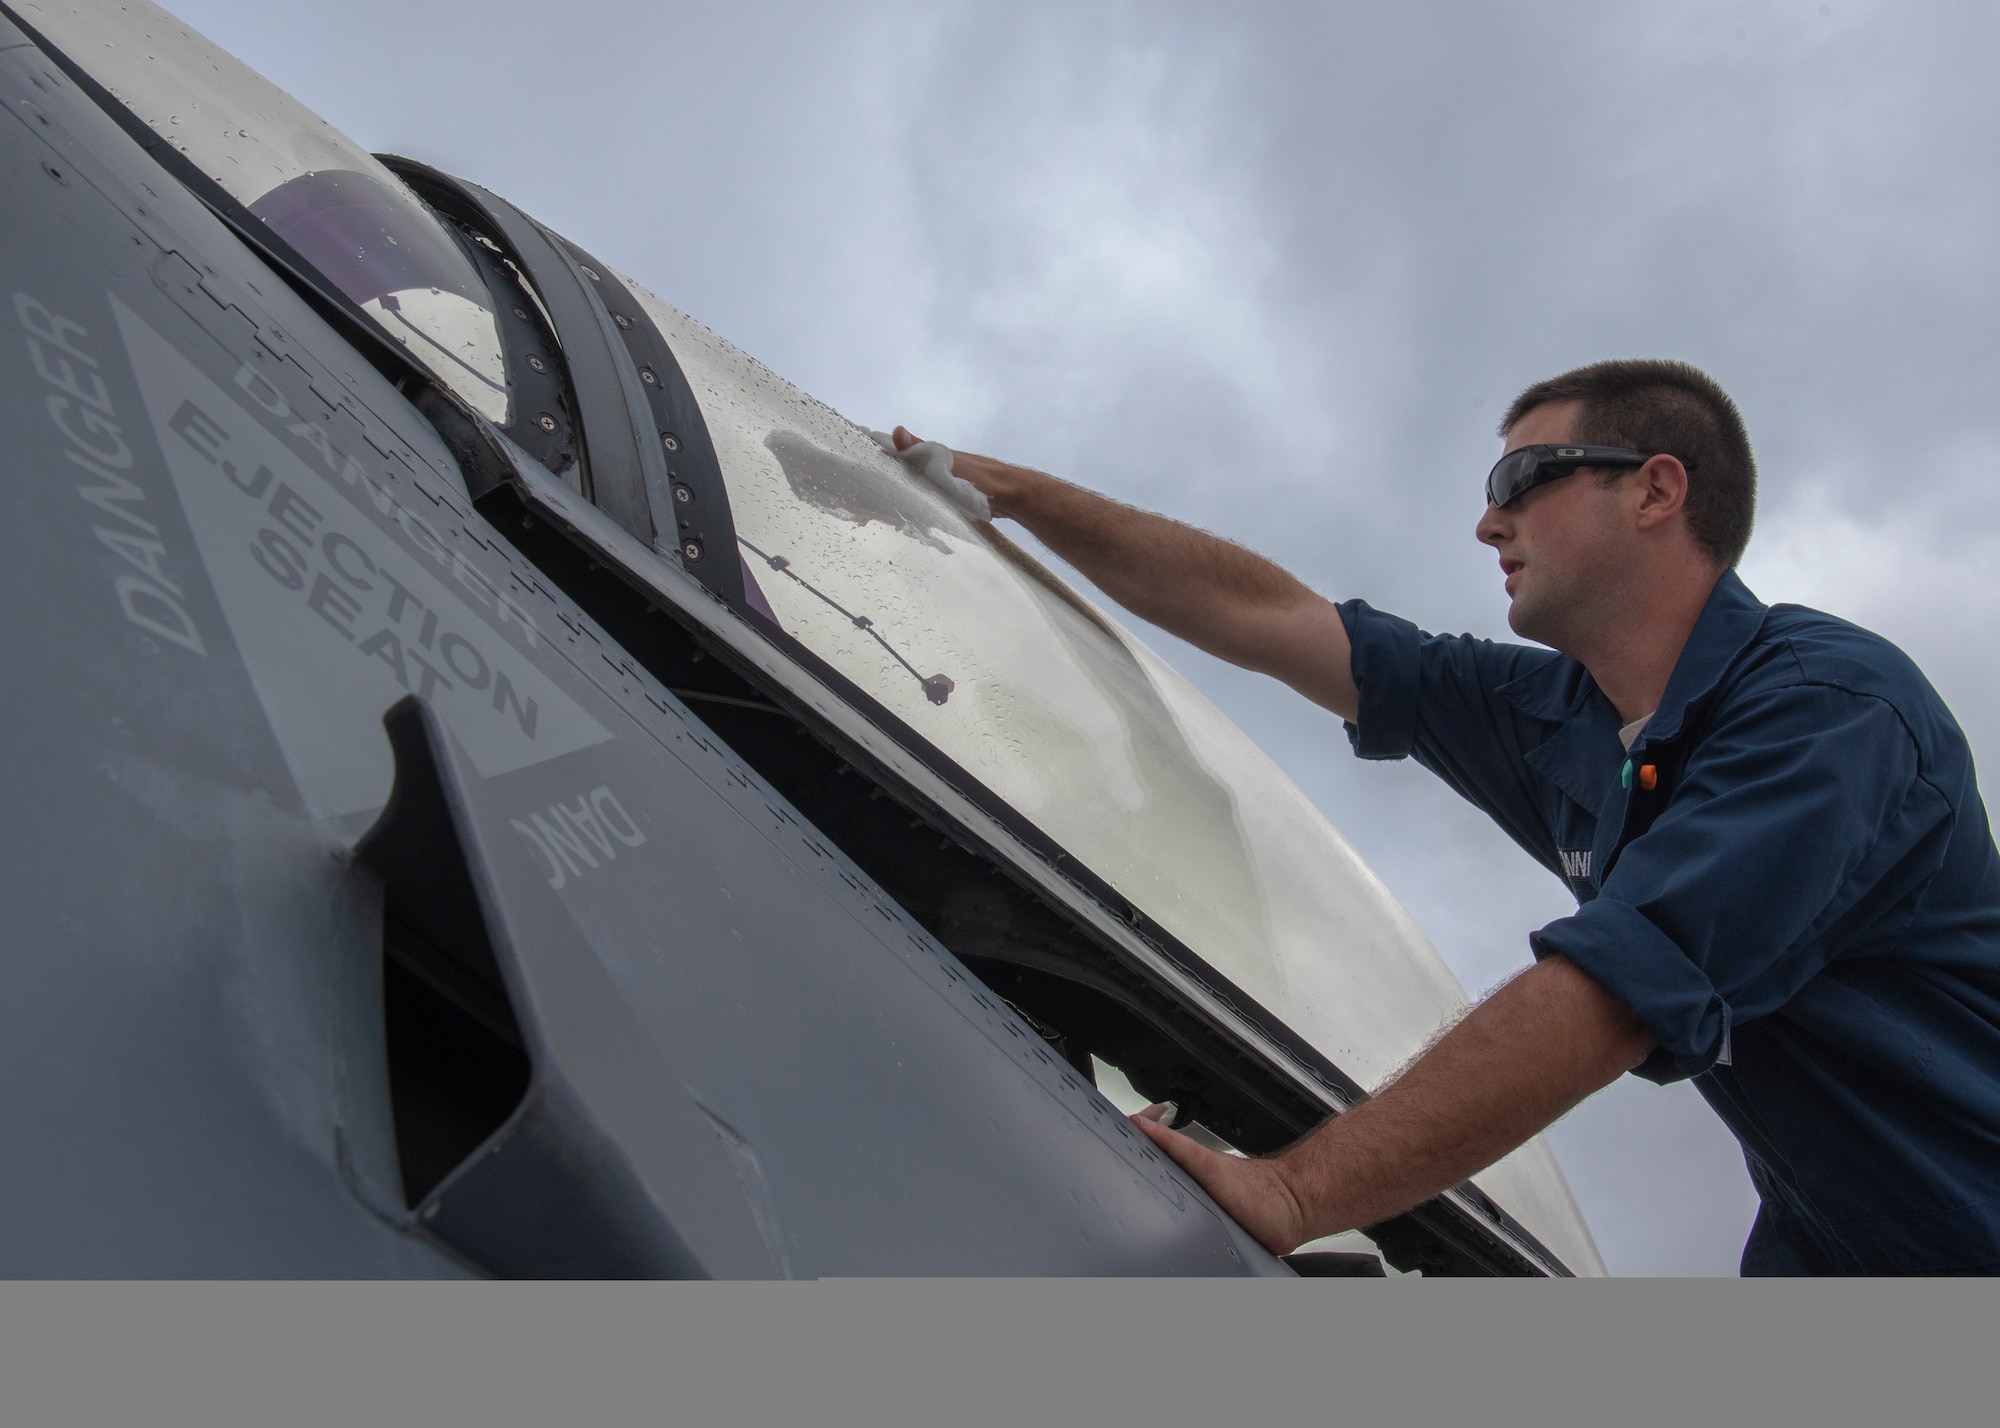 Staff Sgt. Jacob Bonner, a 162nd Wing egress technician, Arizona Air National Guard, cleans the canopy of an F-16C Fighting Falcon at Namest Air Base, Czech Republic. Maintainers clean the aircraft canopy before each sortie to ensure the pilot has a clean line of sight while flying. Ample Strike is a Czech Republic led, multi-national live exercise that offers advanced air/land integration training to Joint Terminal Attack Controllers (JTACs) and Close Air Support (CAS) aircrews. The aircraft maintenance accomplished by the maintainers enable the United States forces’ to respond quickly to support and defend our allies. (U.S. Air National Guard photo by Staff Sgt. George Keck)